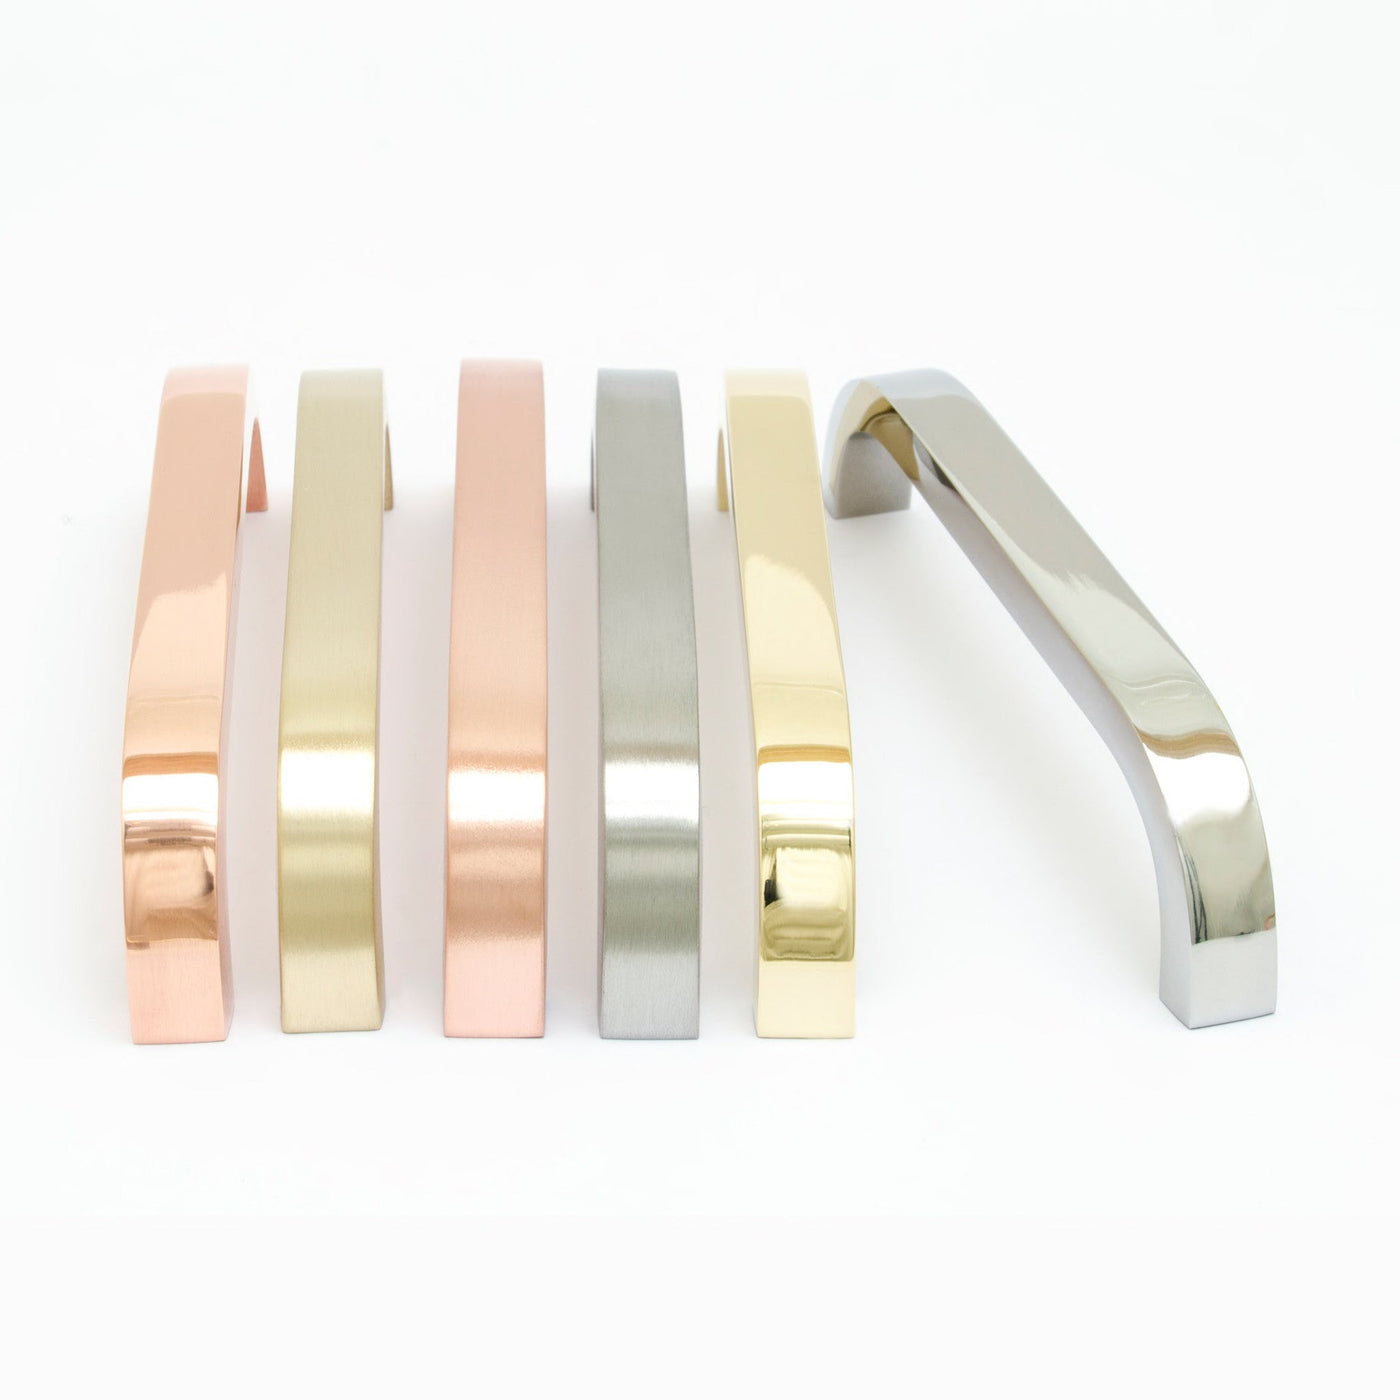 A set of four Baccman Berglund Slim Pull metal handles on a white background.